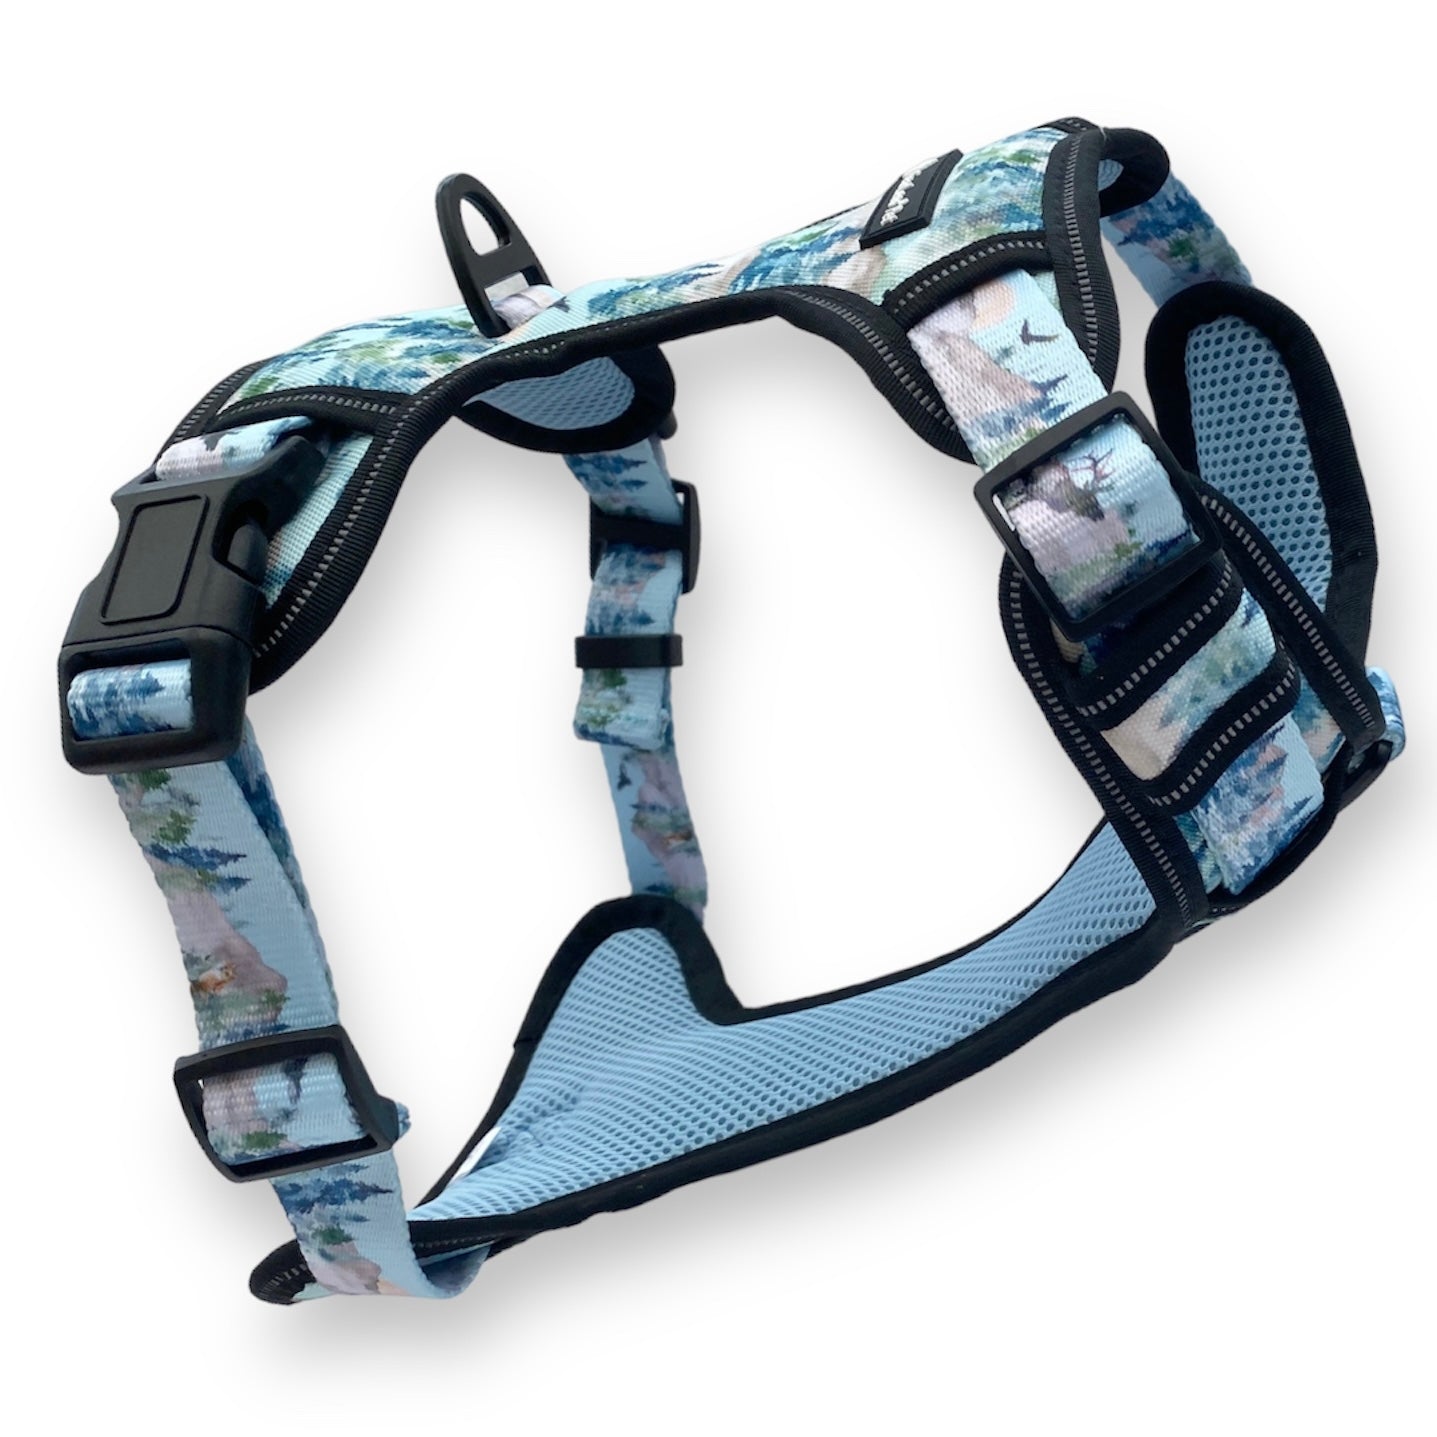 a 3d model of a no pull dog harness for large dos from fearless pet in a trees print